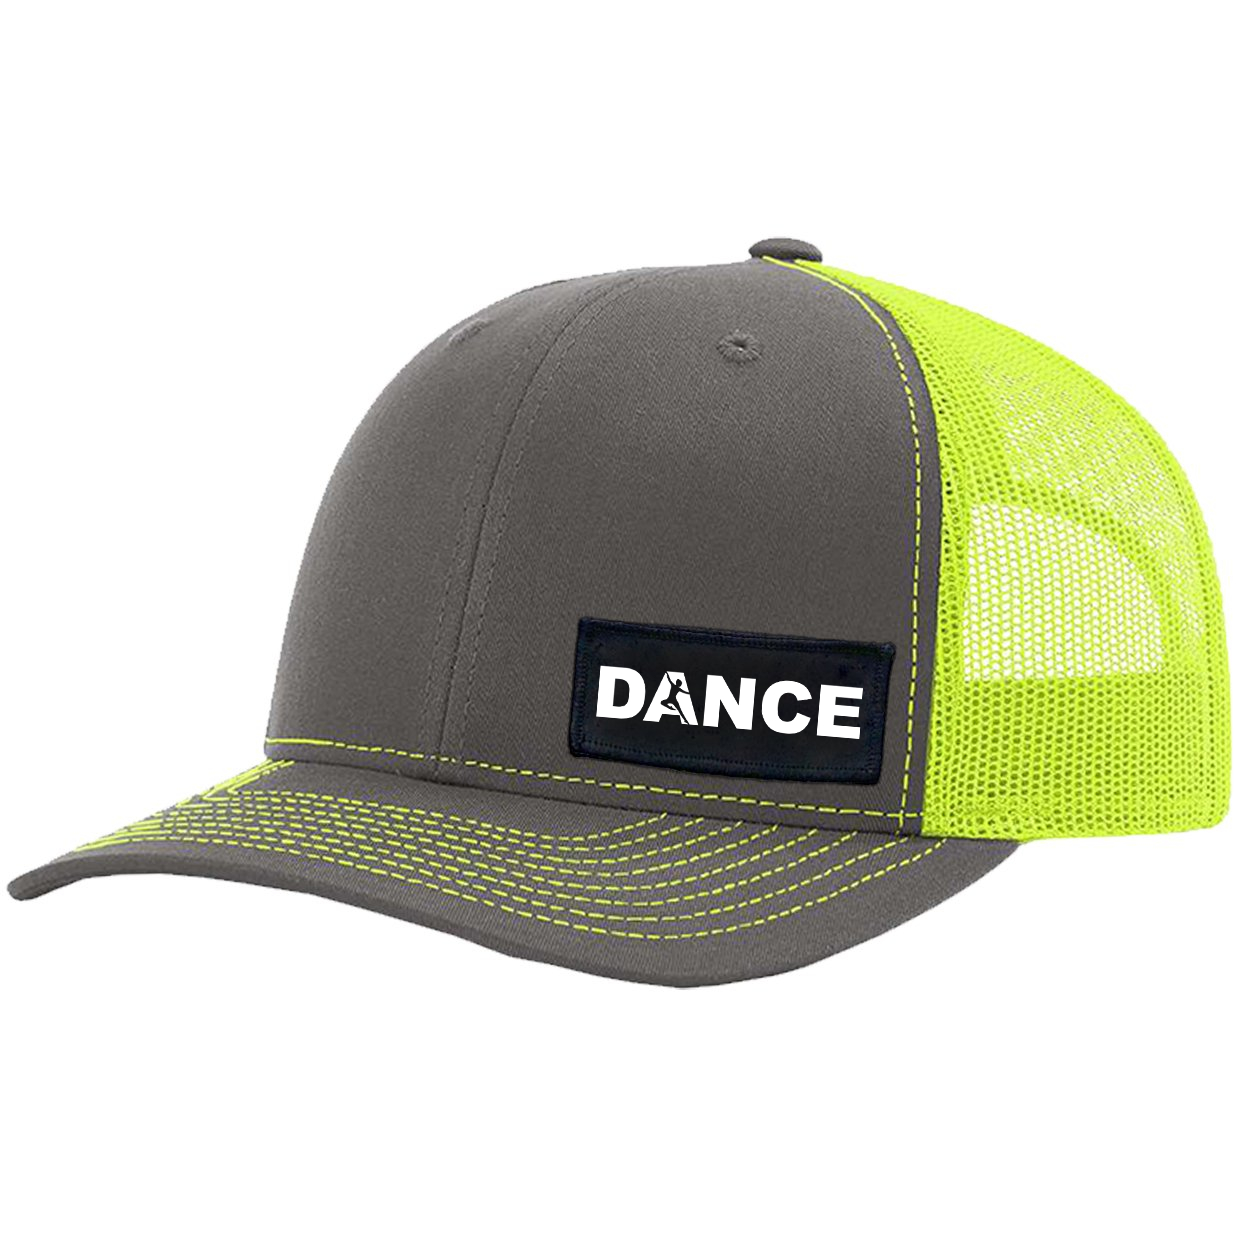 Dance Silhouette Logo Night Out Woven Patch Snapback Trucker Hat Charcoal/Neon Yellow (White Logo)